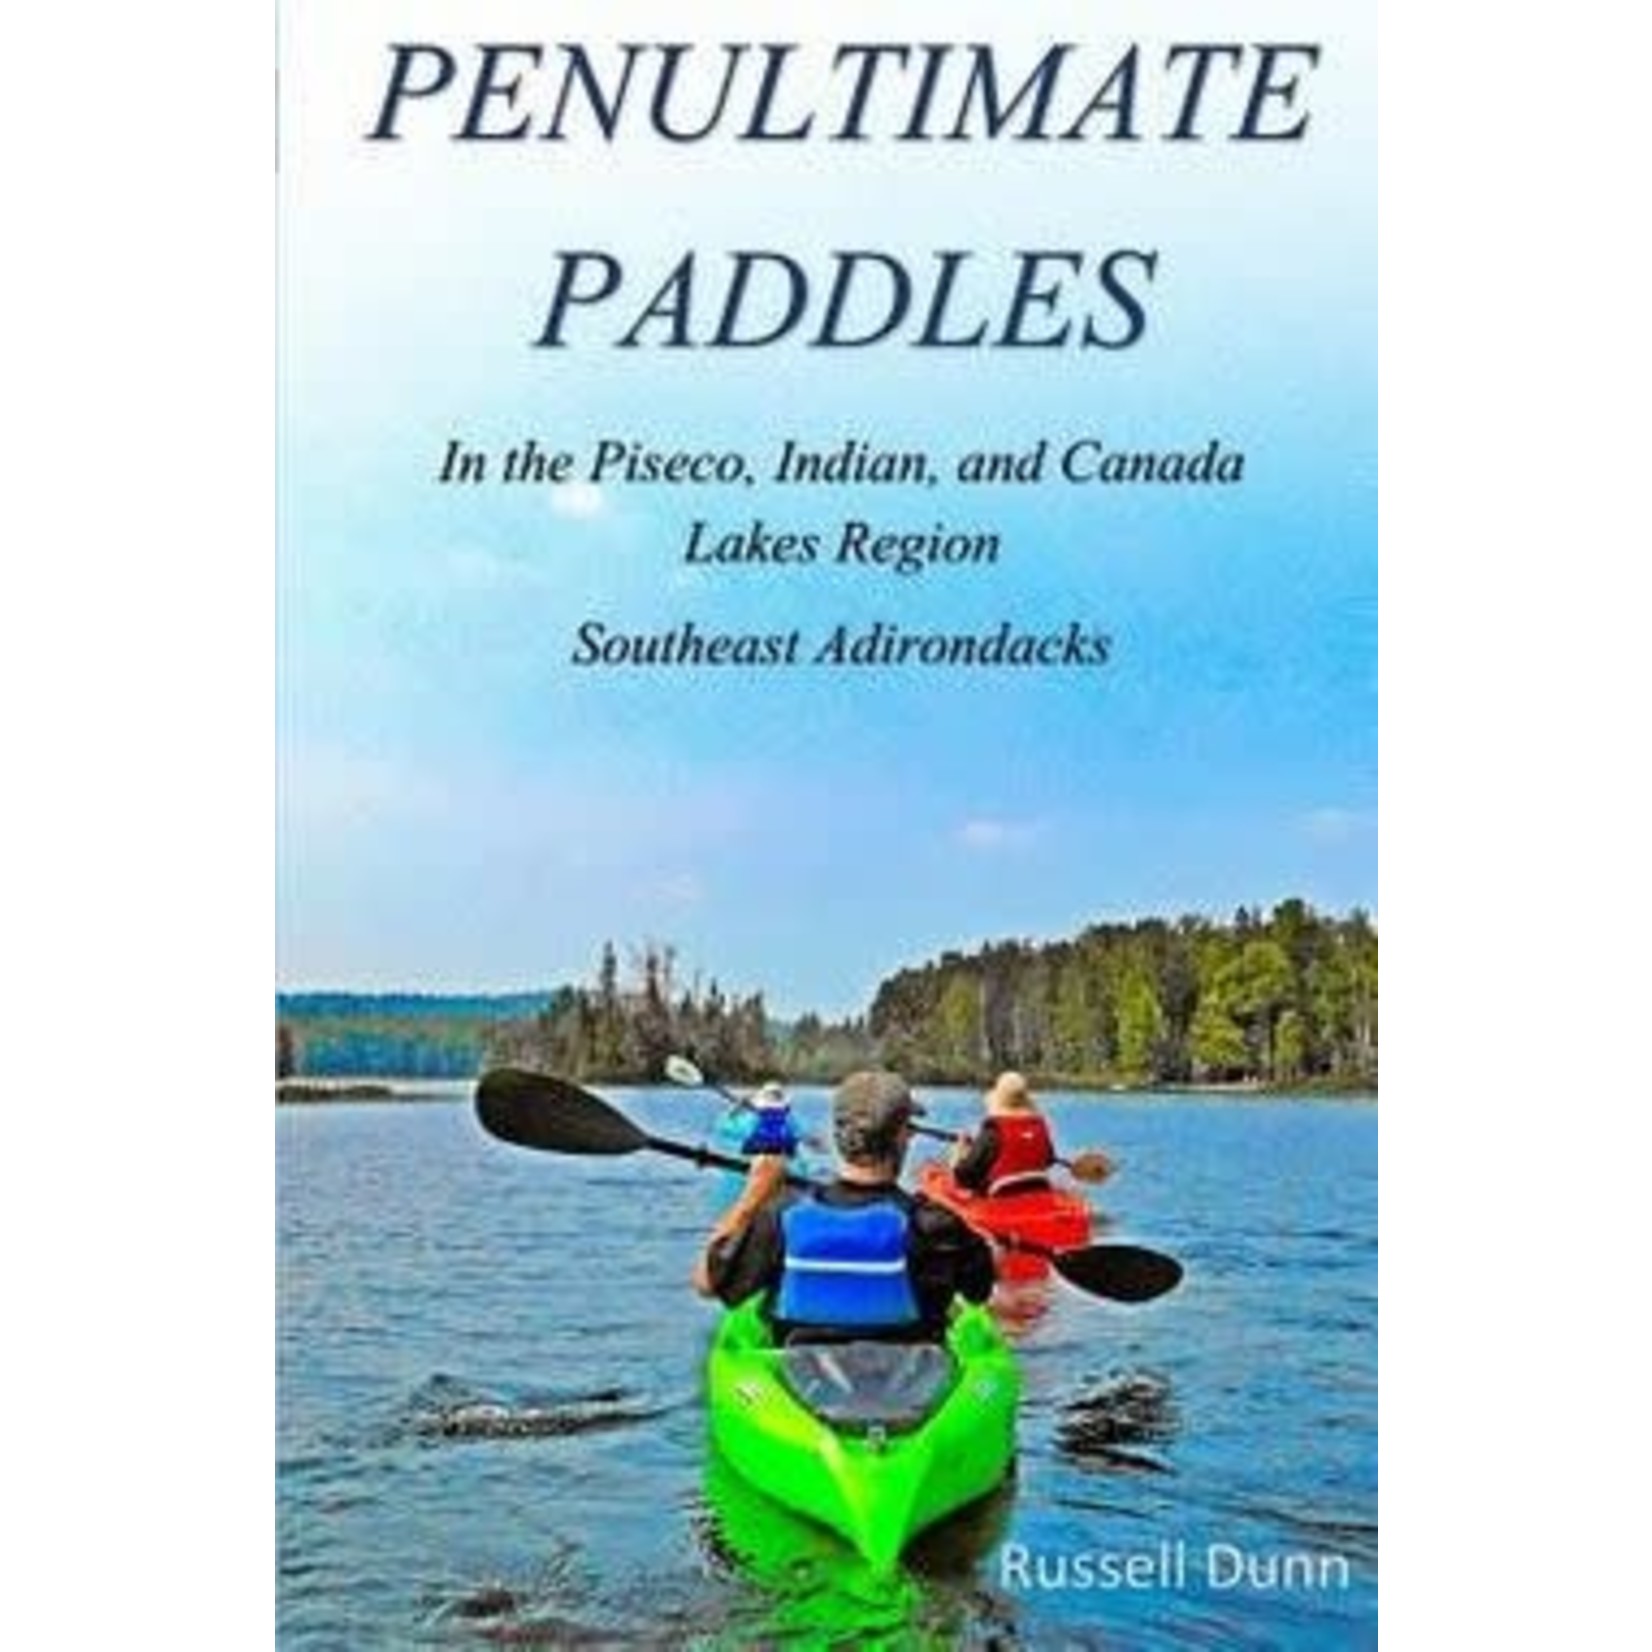 Penultimate Paddles In the Piseco, Indian, and Canada Lakes Region Southeast Adirondacks Russel Dunn